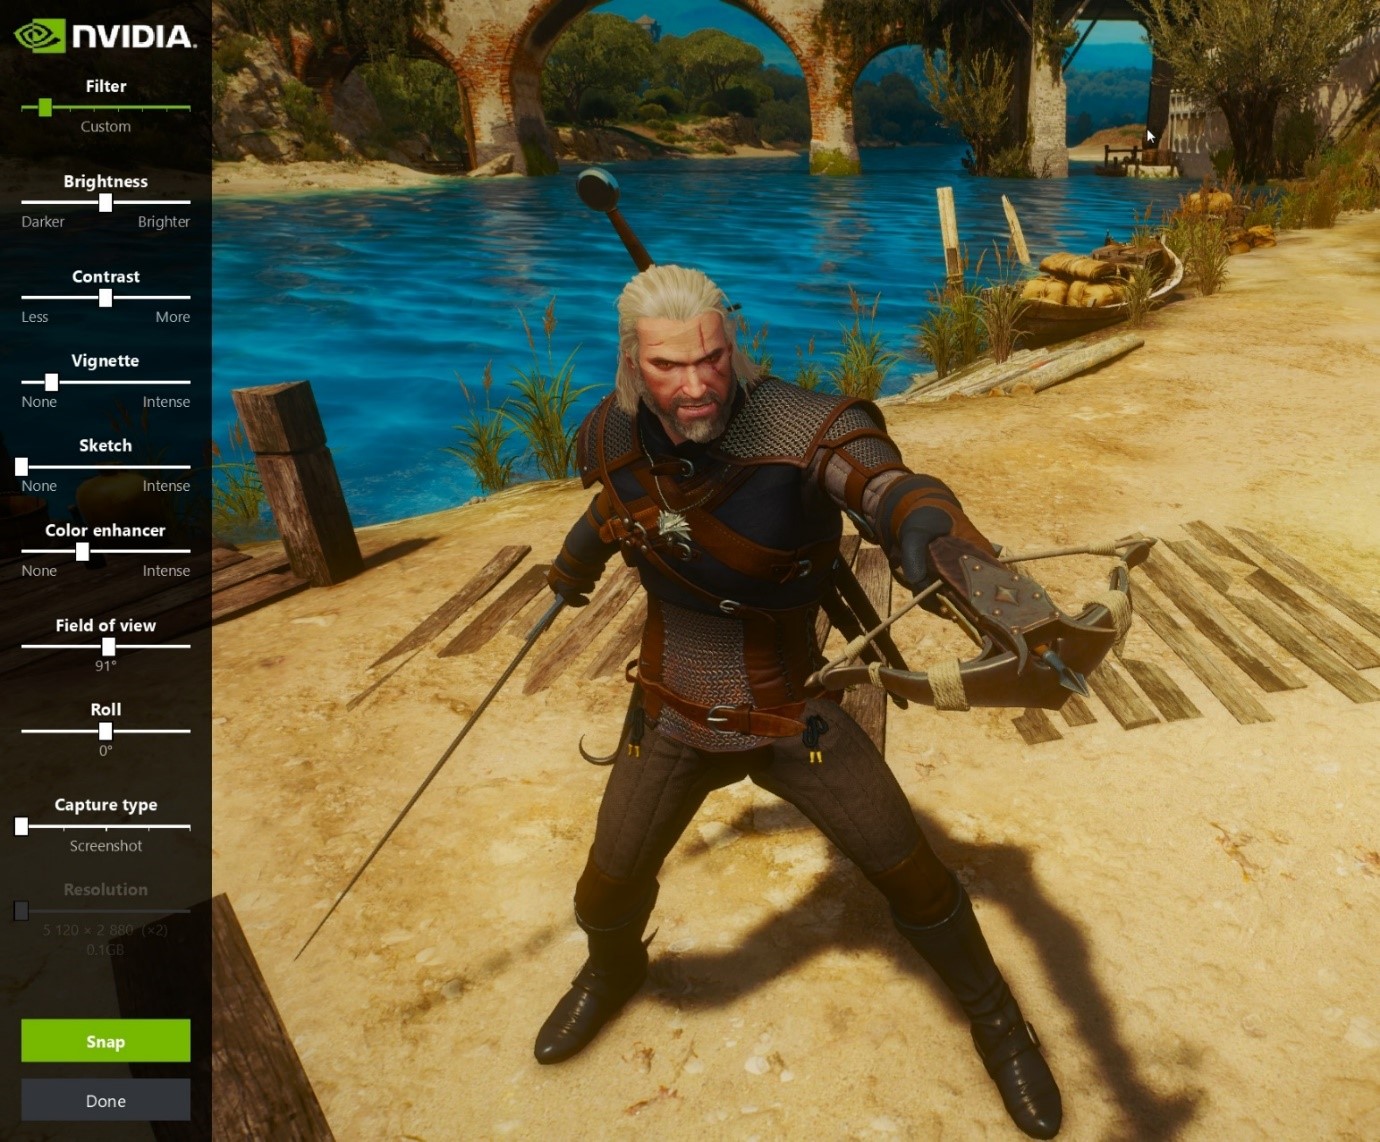 the-witcher-3-nvidia-ansel-user-interface.jpg